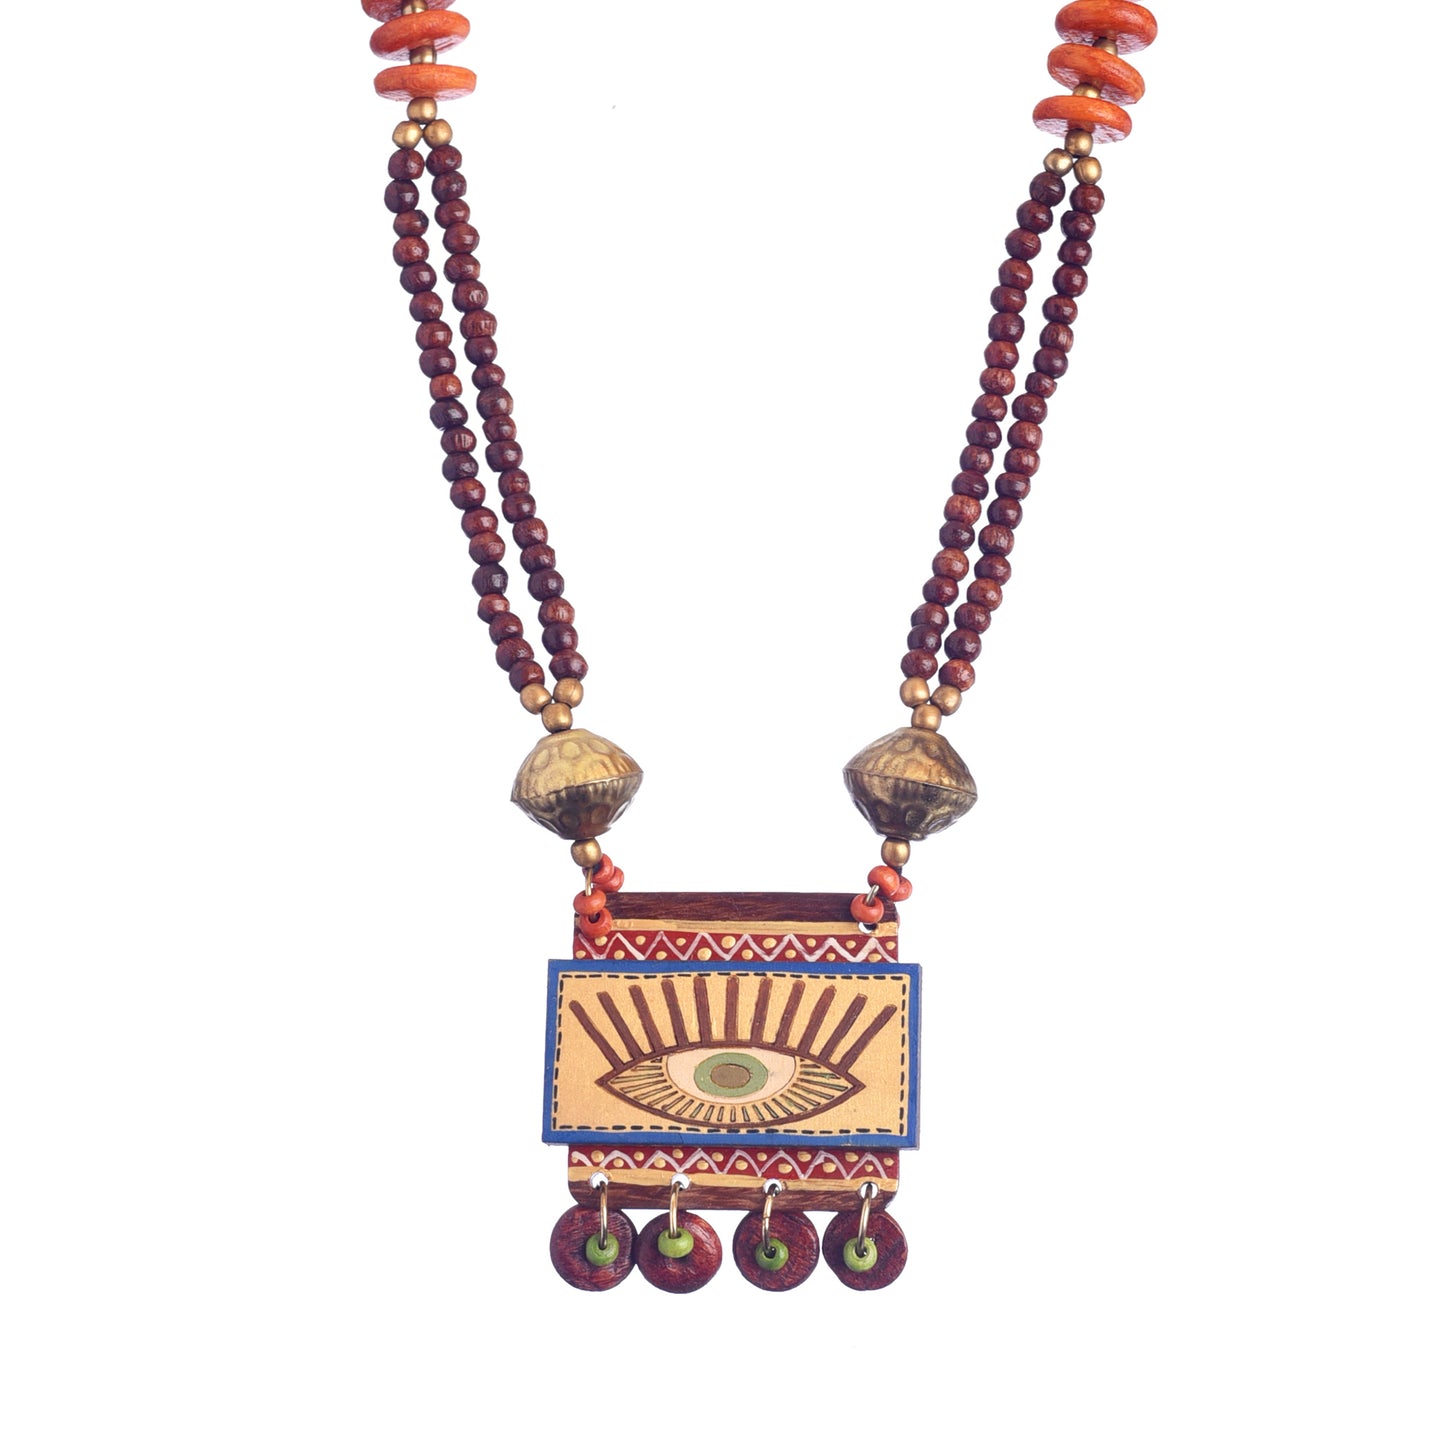 Evil Eye-I' Handcrafted Tribal Dhokra Necklace